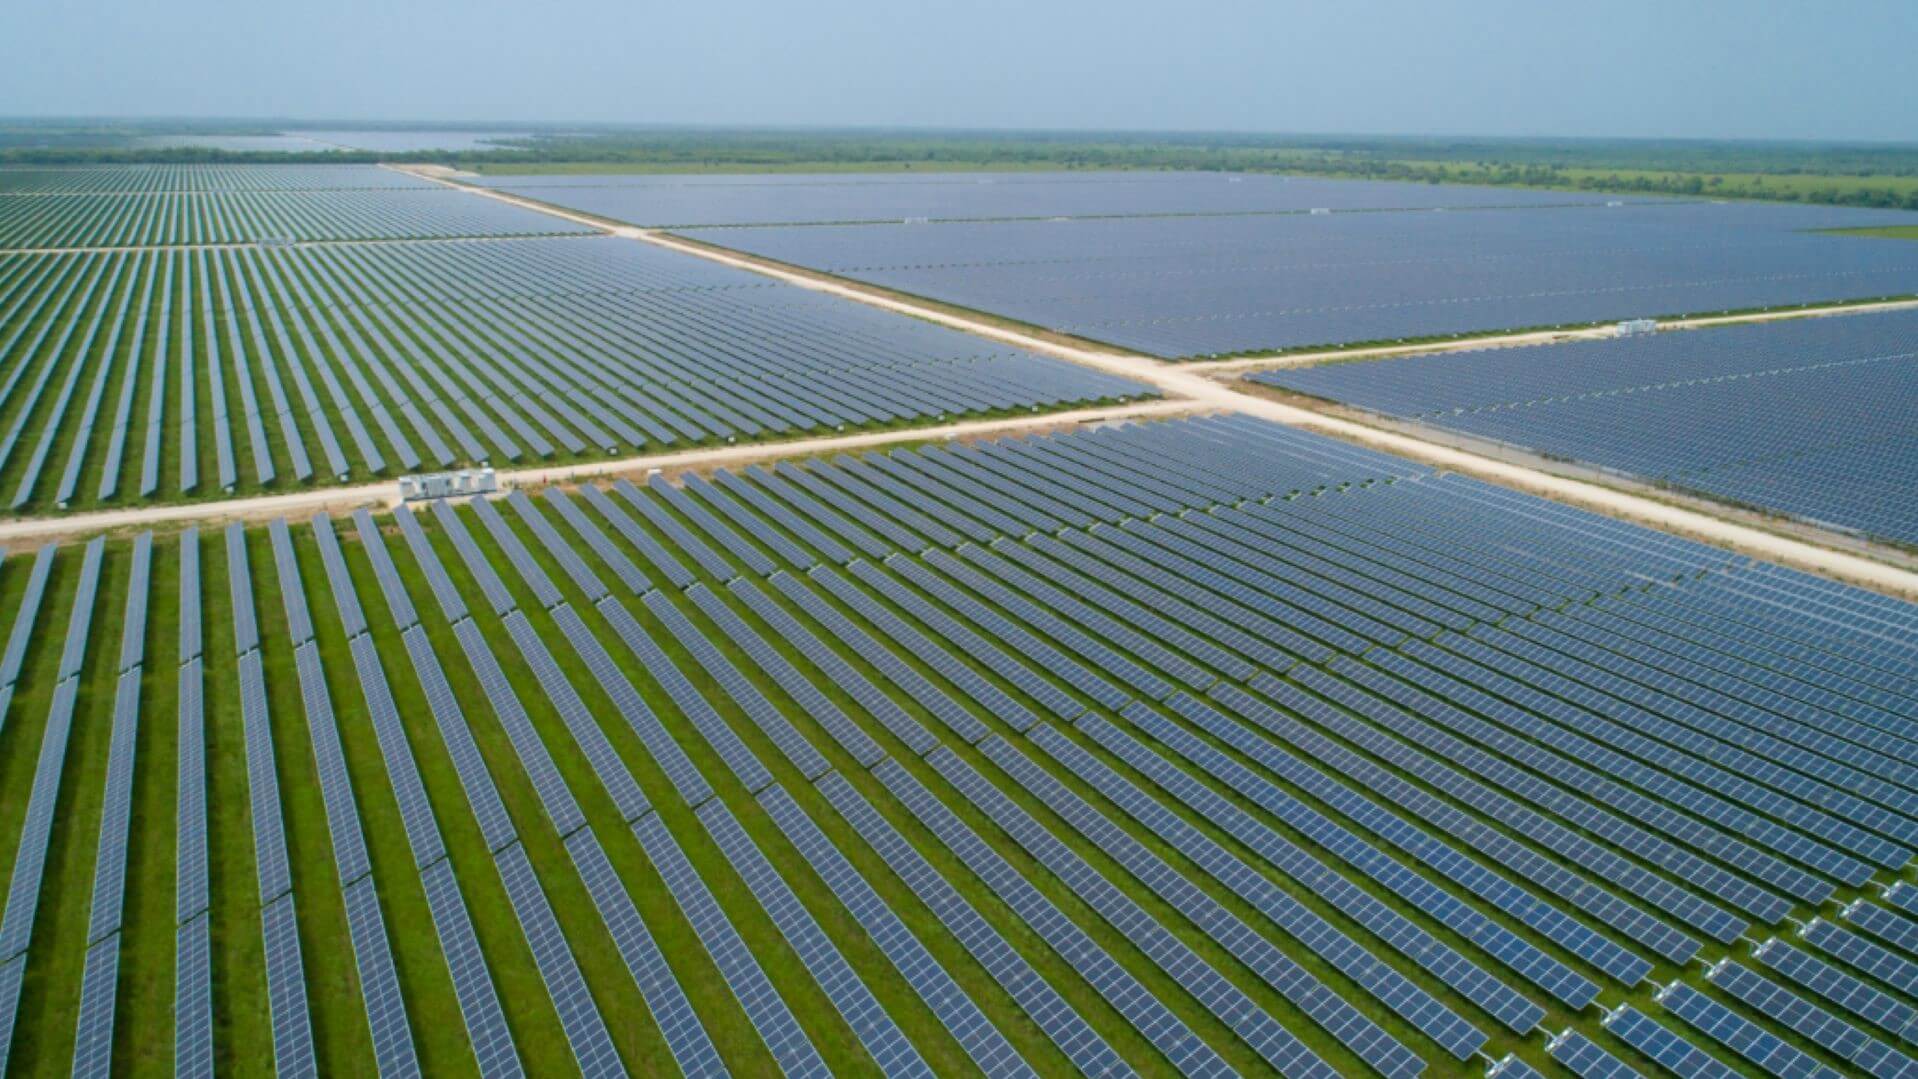 Aerial view of large solar farm